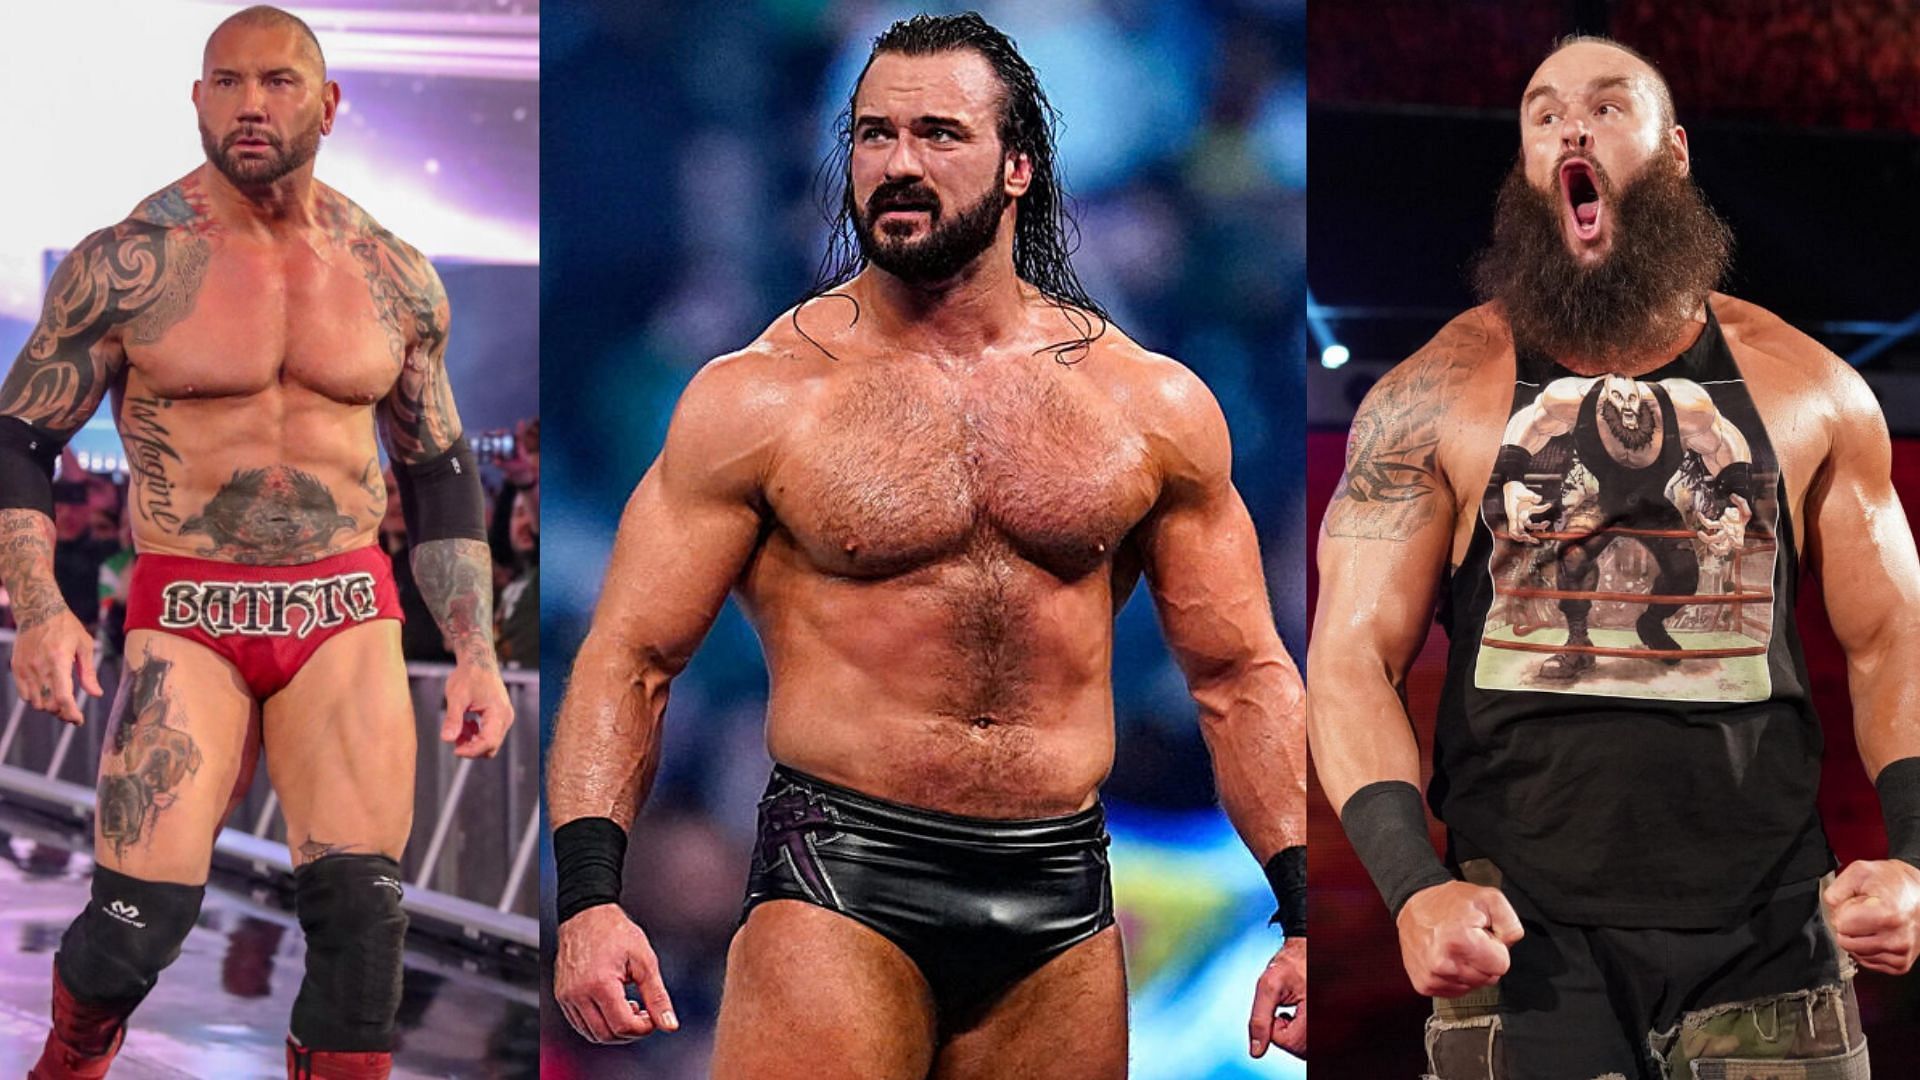 Batista, Drew McIntyre, and Braun Strowman. (From left to right)